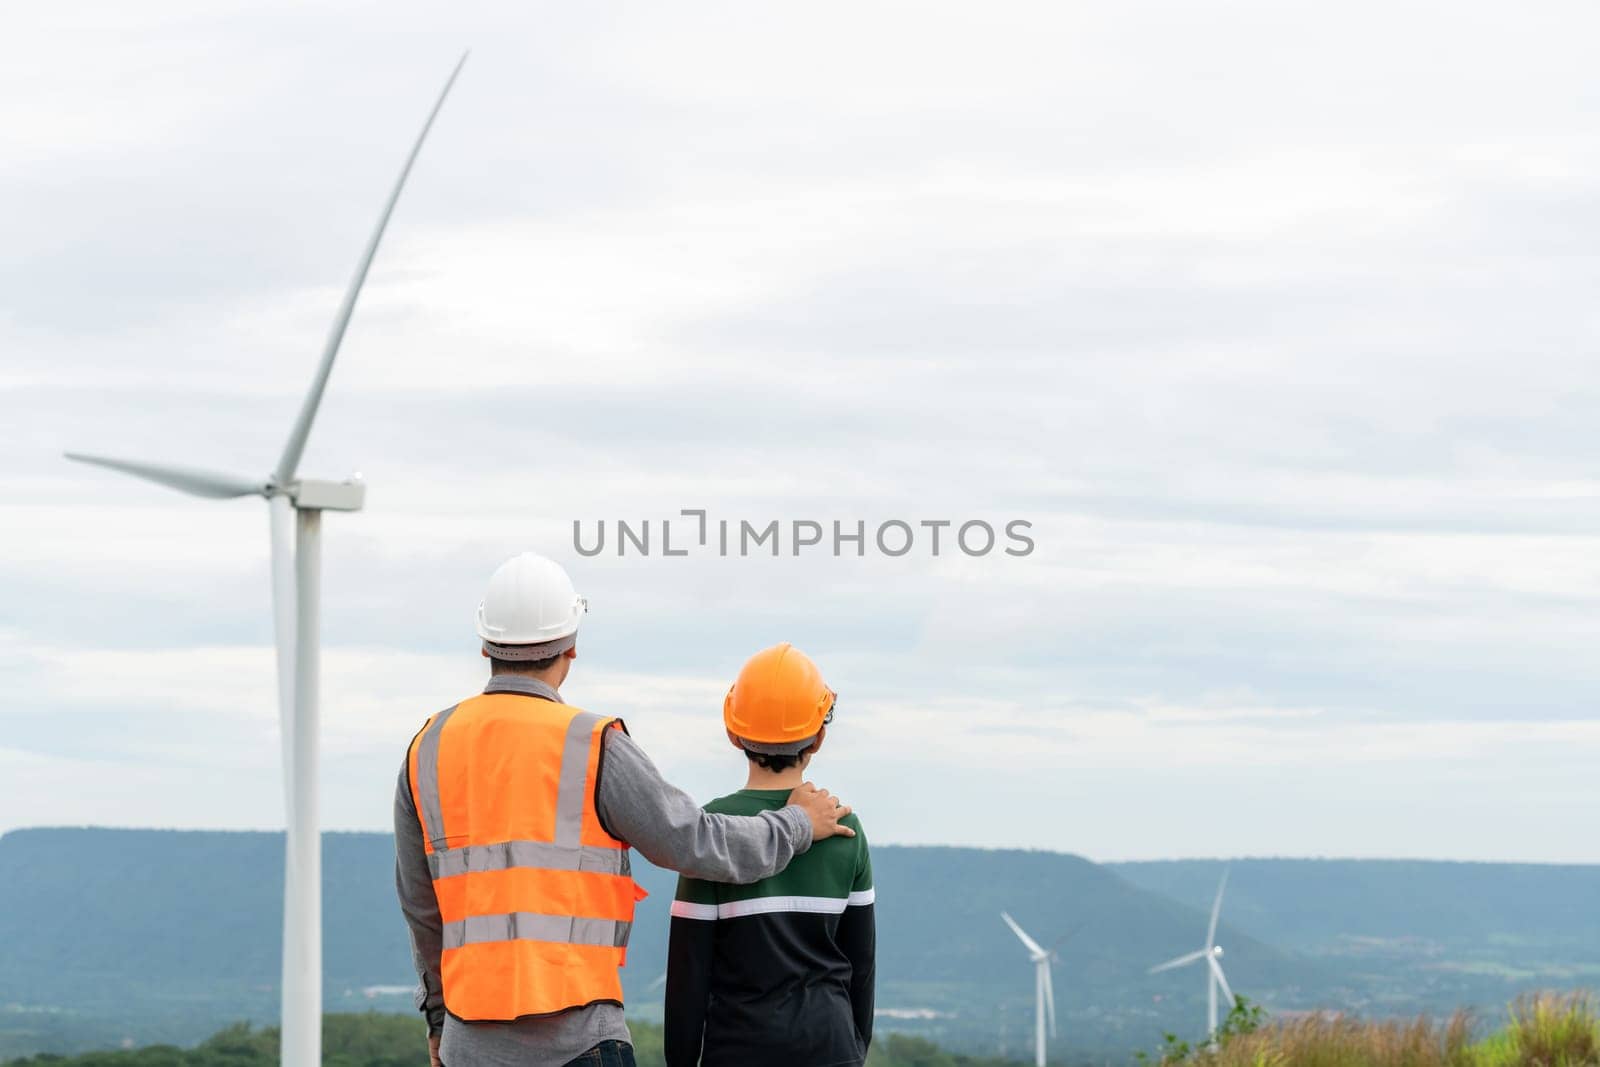 Engineer with his son on a wind farm atop a hill or mountain in the rural. Progressive ideal for the future production of renewable, sustainable energy. Energy generation from wind turbine.